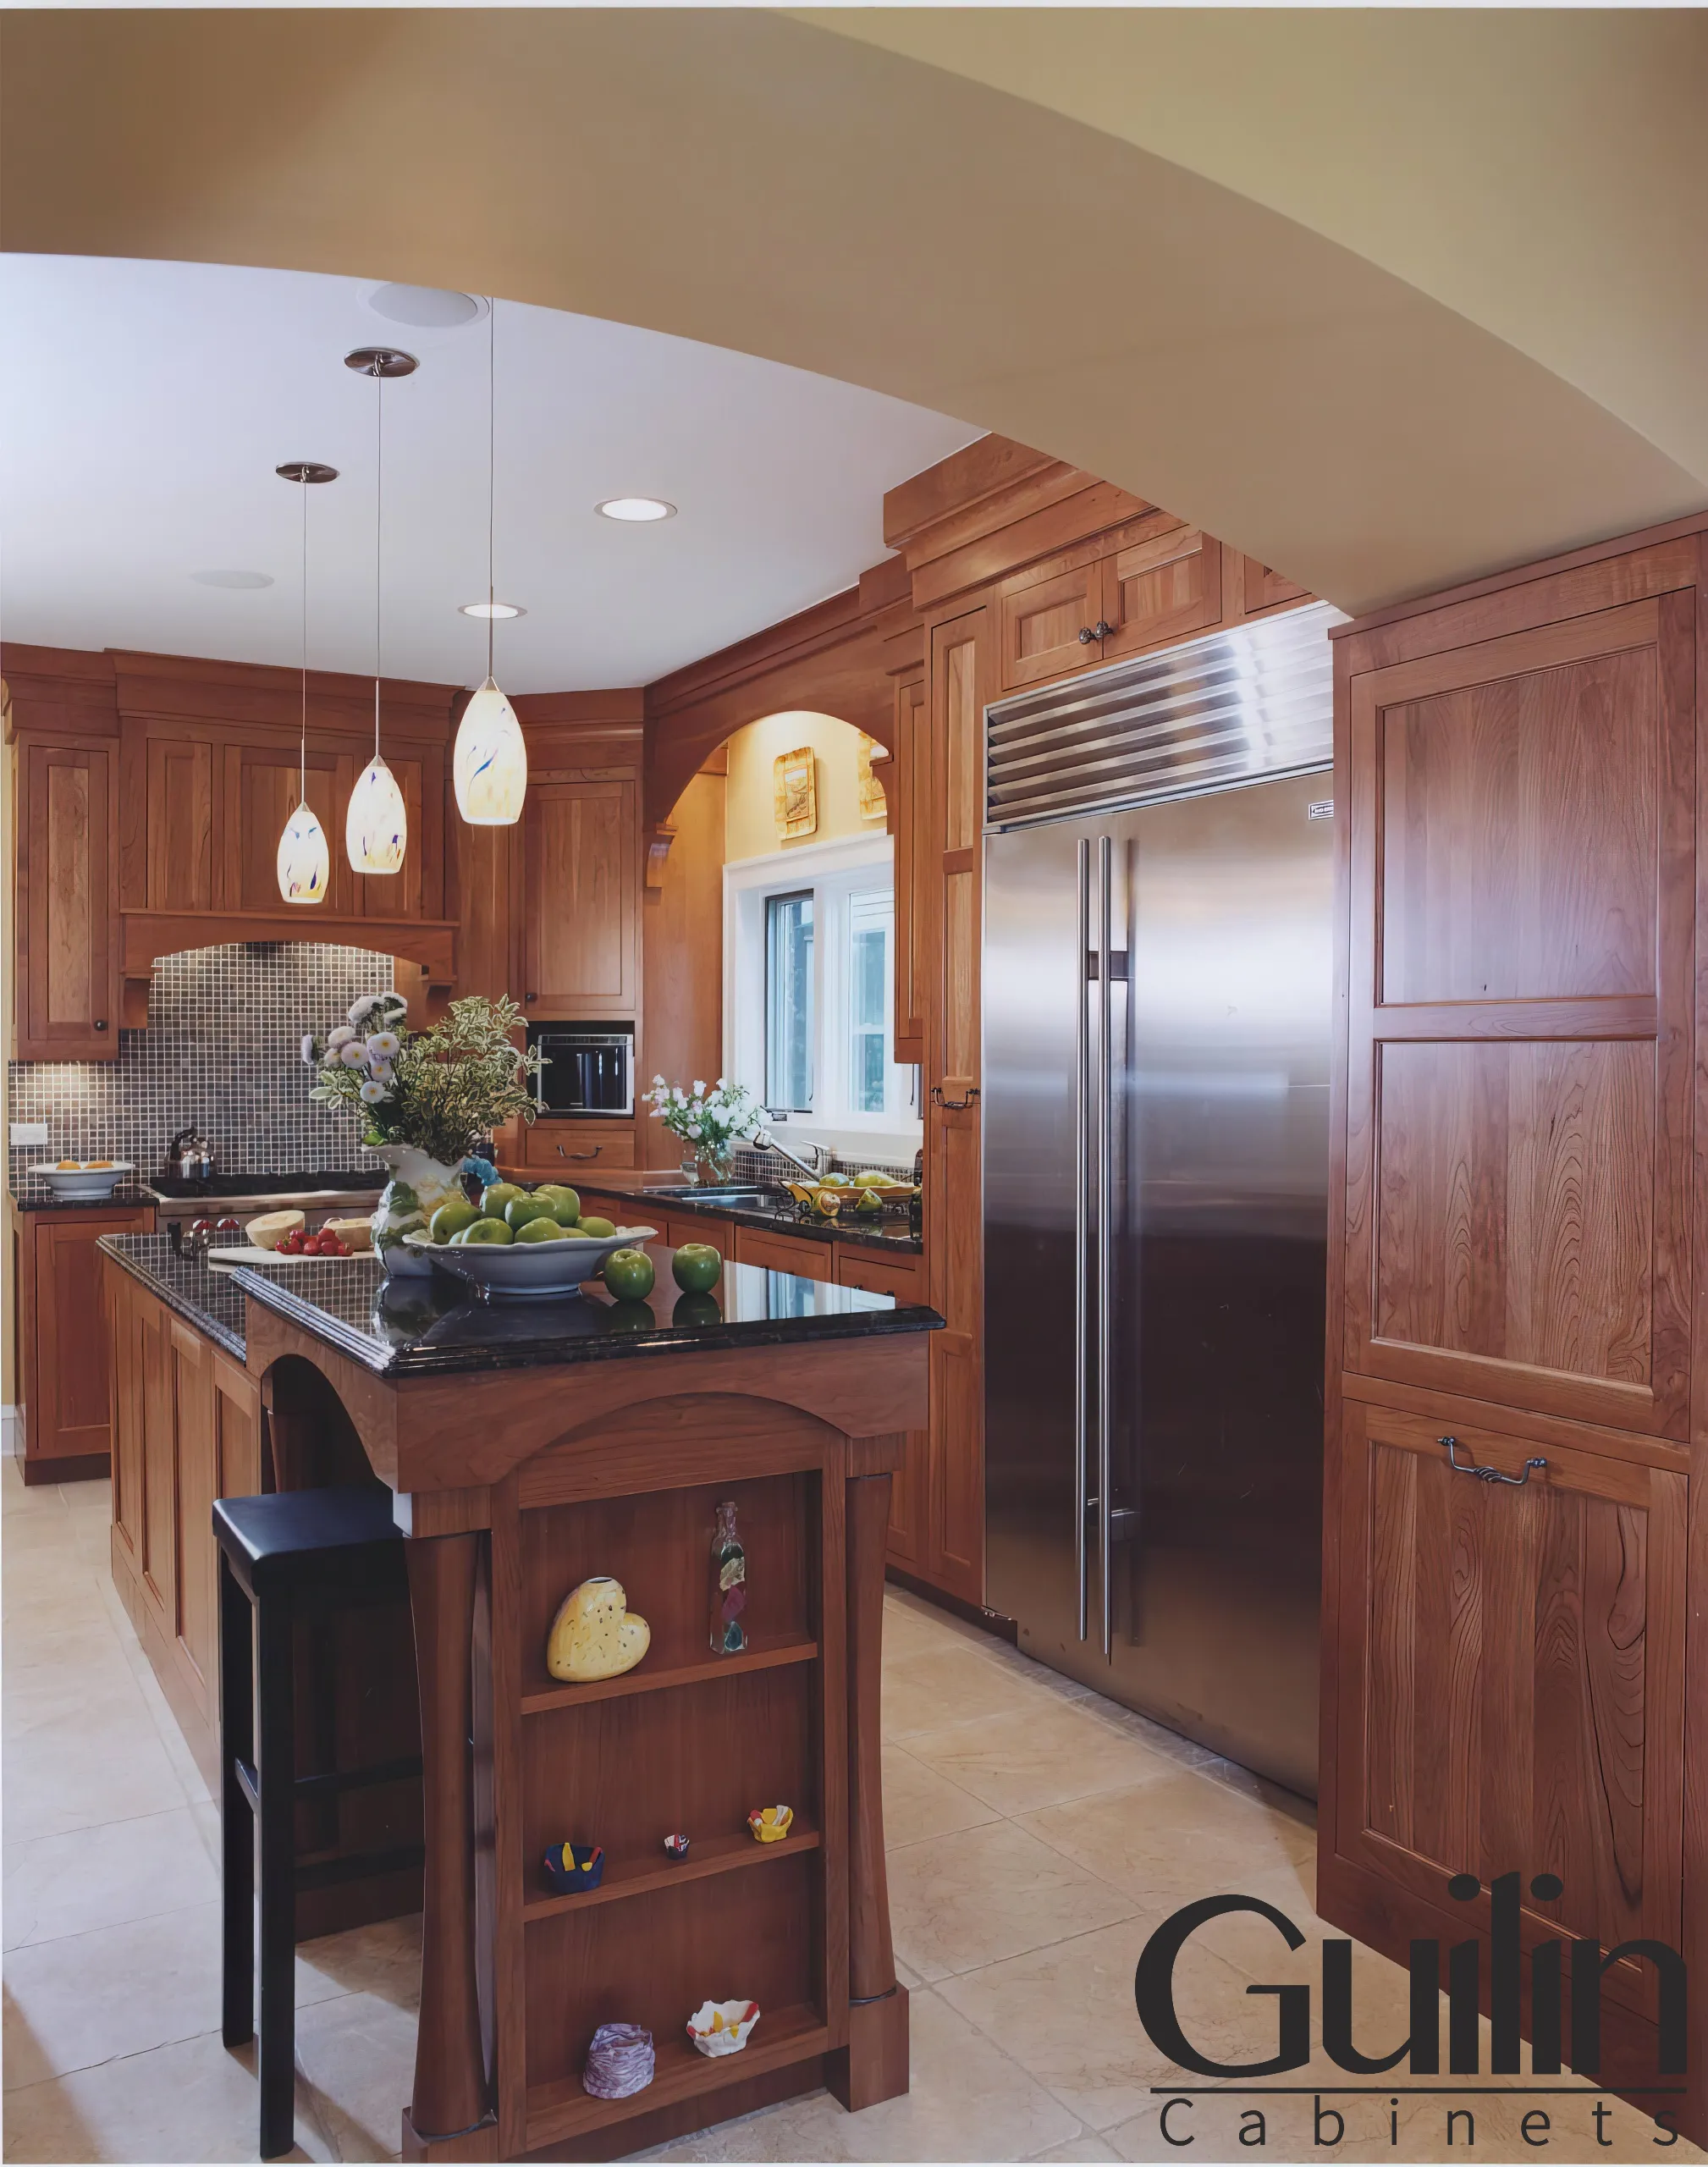 Ideals Materials For Kitchen Cabinets: Soild Wood, Plywood, MDF, Stainless steel...